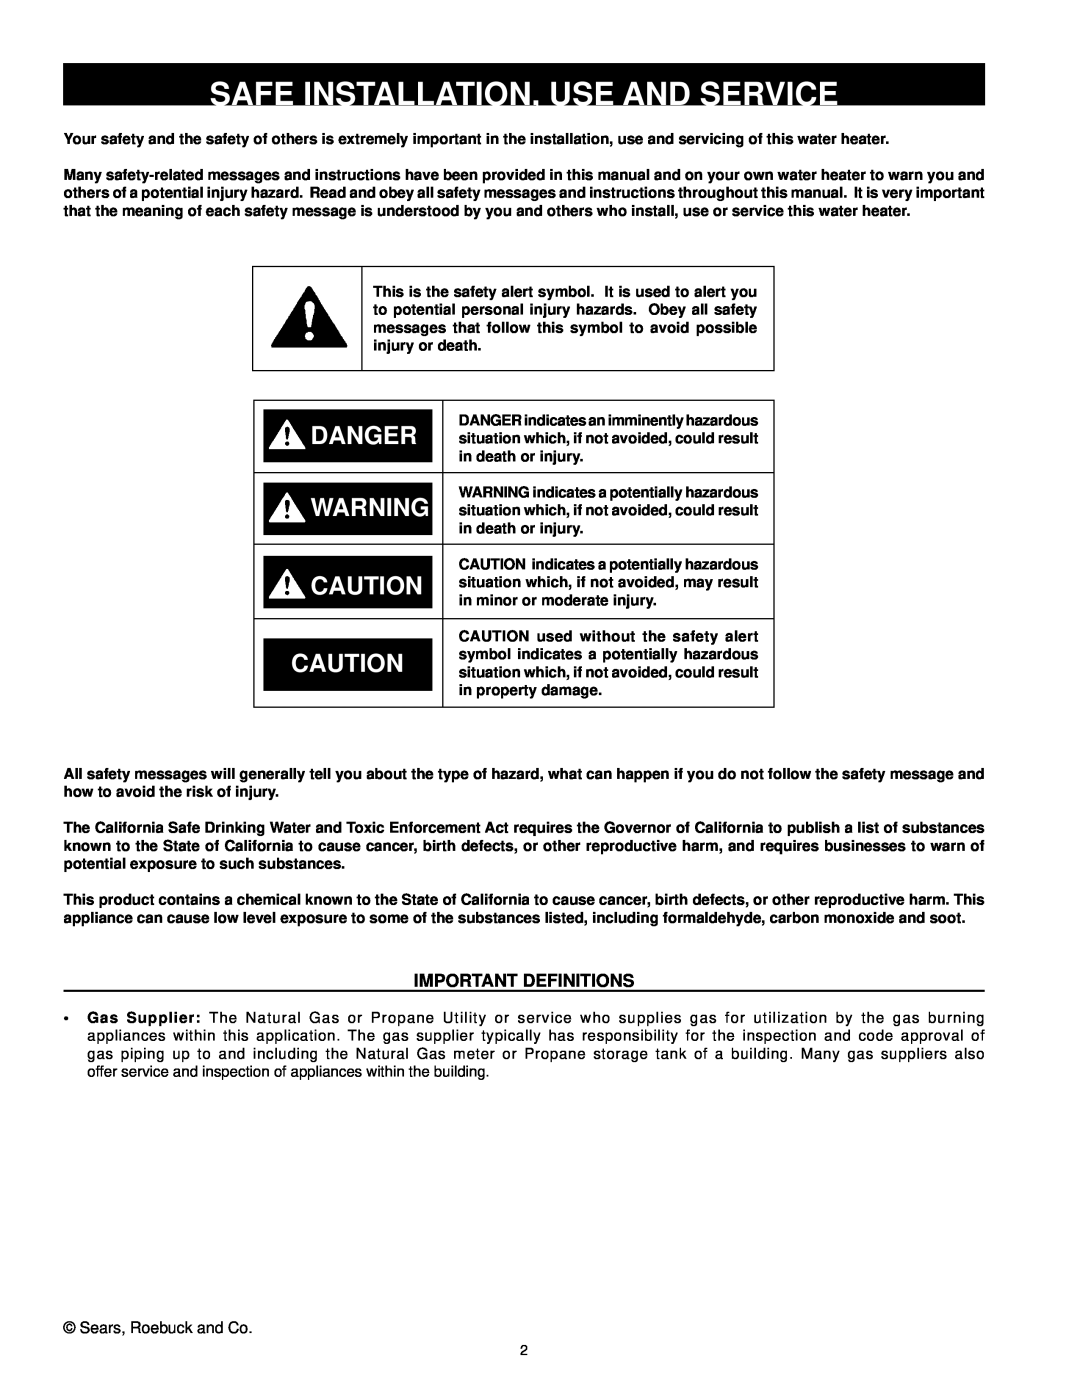 Kenmore 153.33385 owner manual Safe Installation, Use And Service, Danger, Important Definitions 